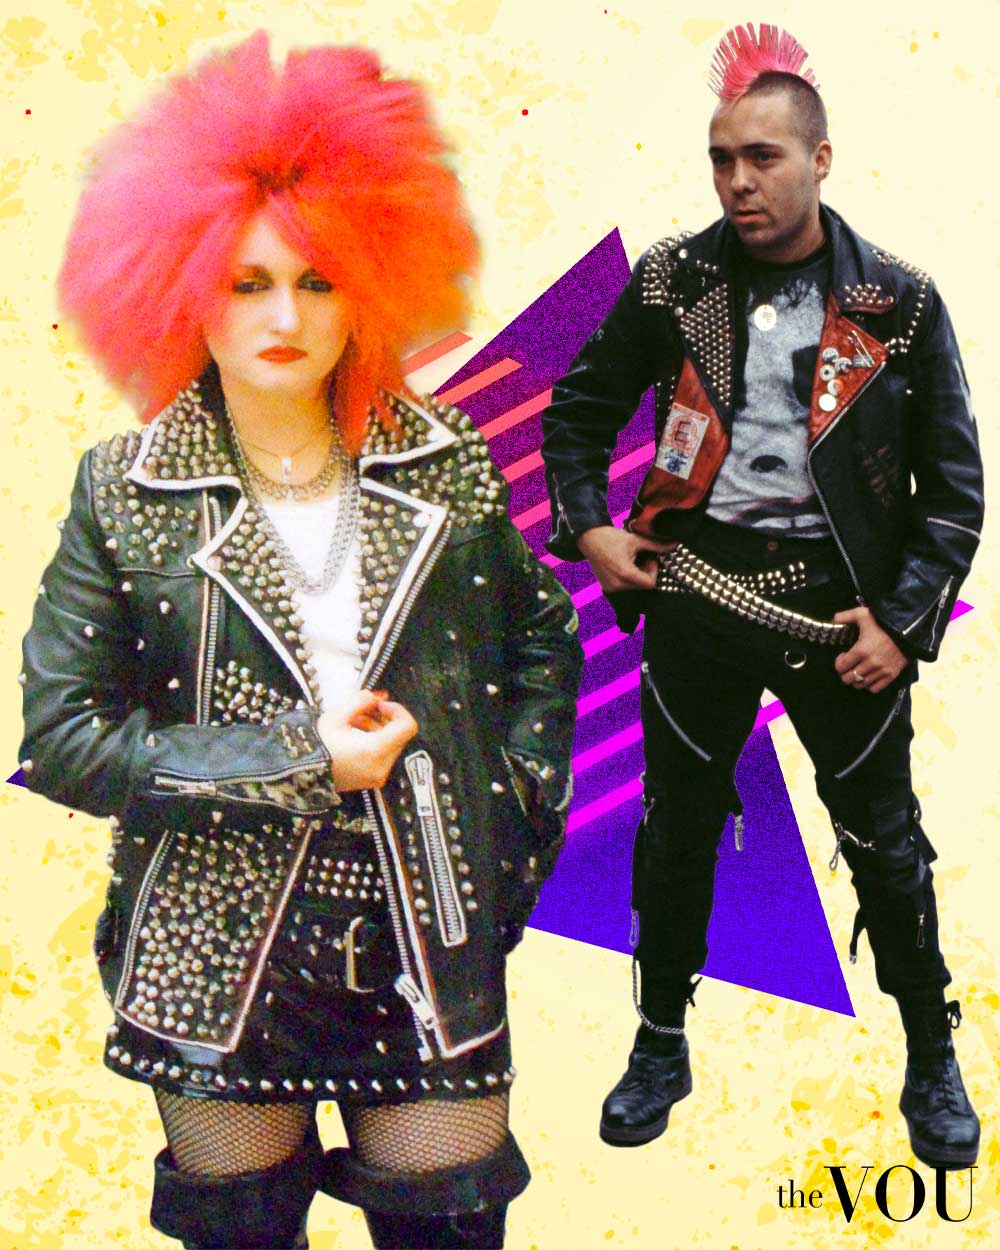 Punk Rock Fashion of the 80s